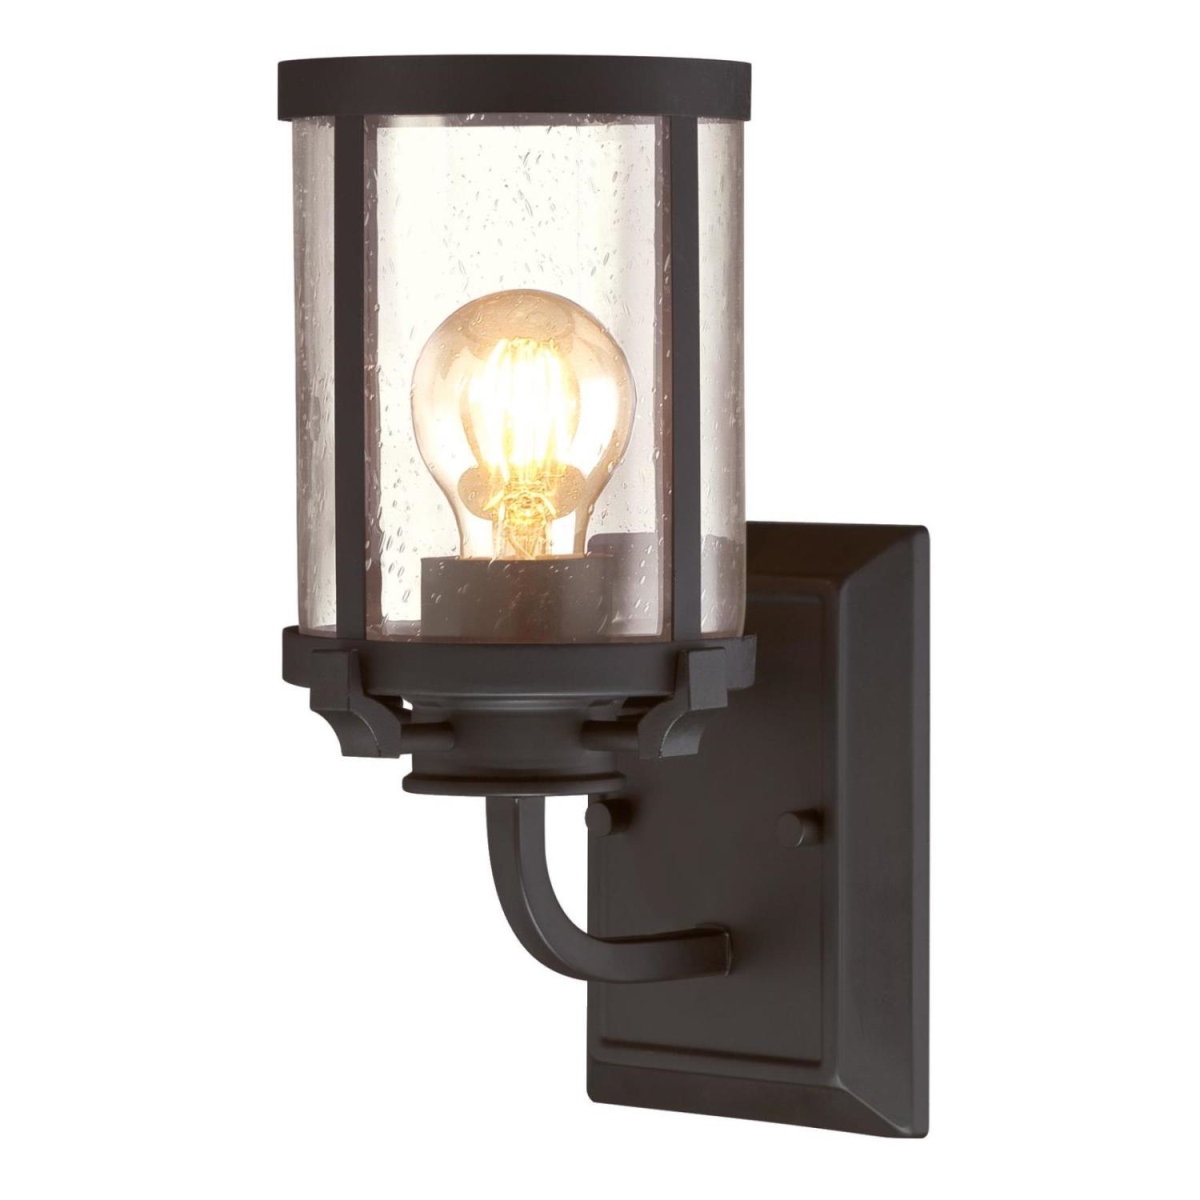 6368000 1 Light Wall Fixture With Clear Seeded Glass - Oil Rubbed Bronze